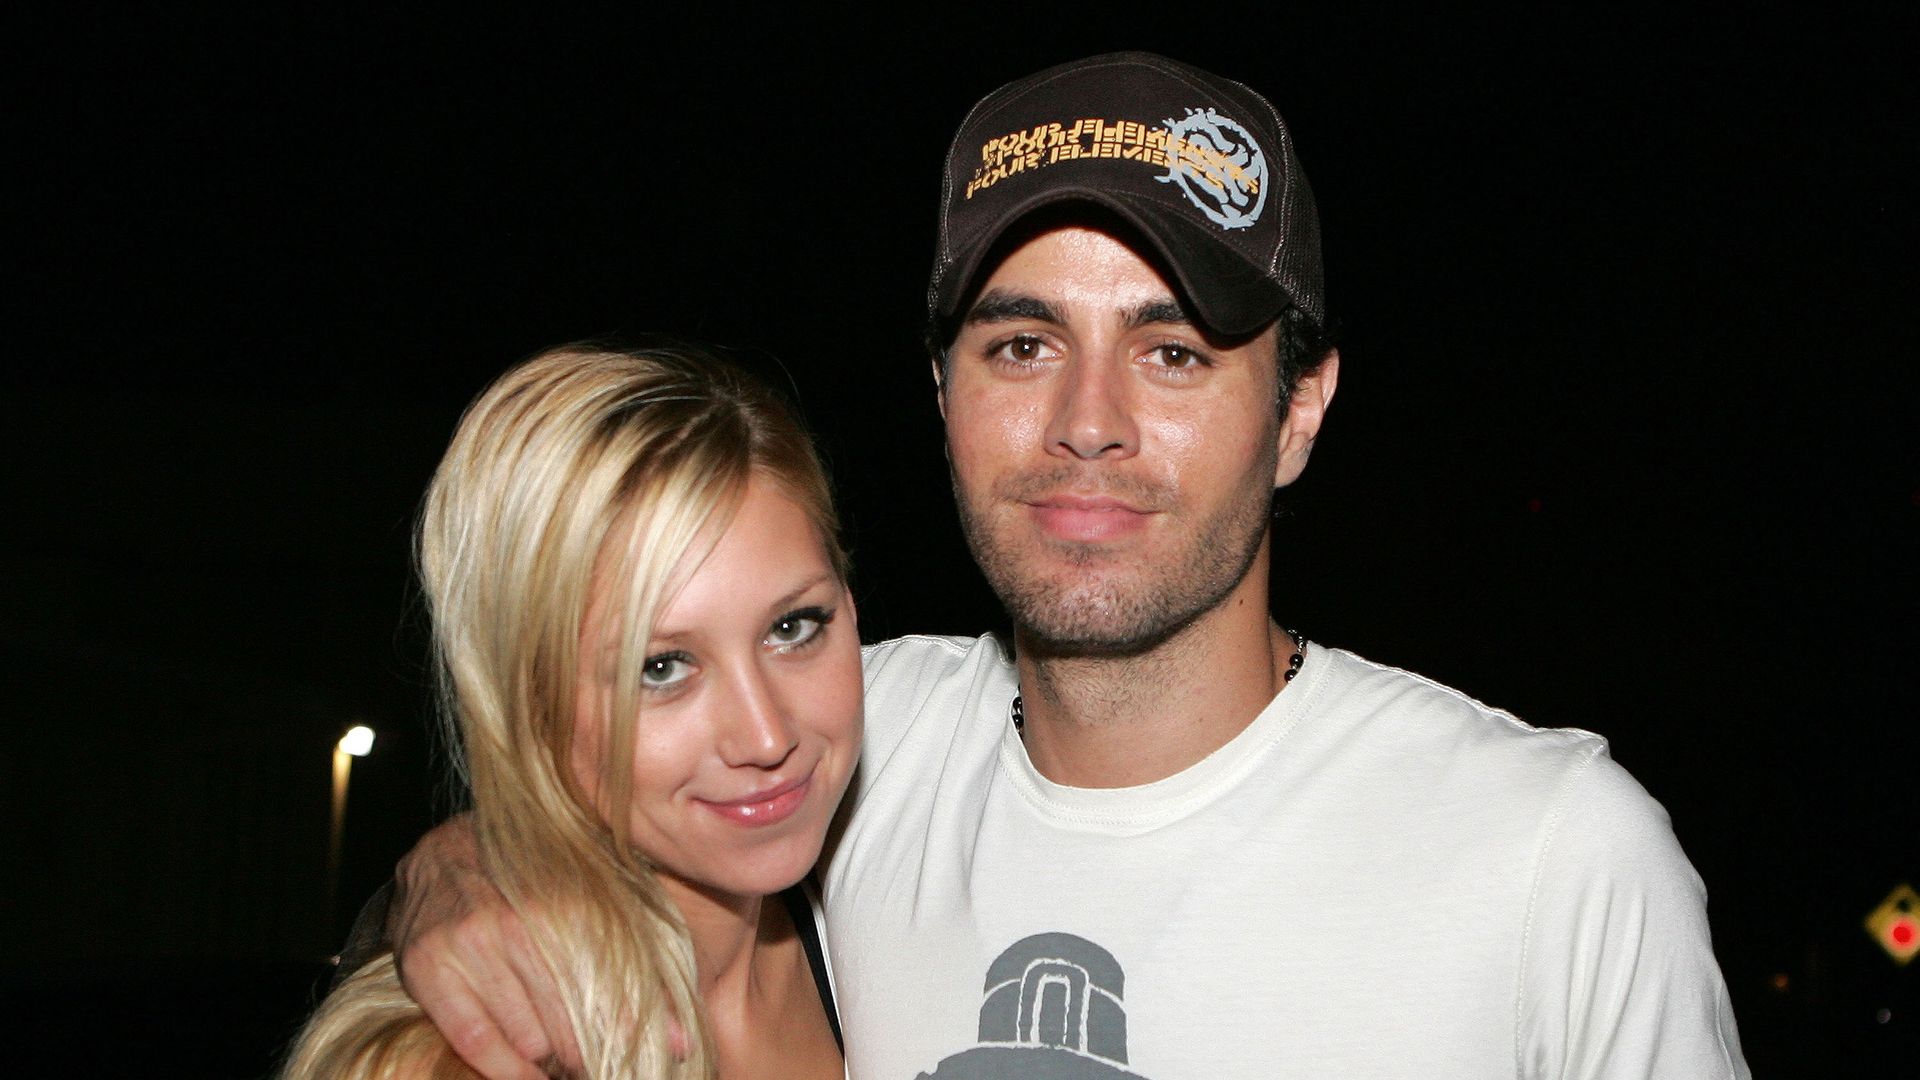 Tennis player Anna Kournikova and singer Enrique Iglesias leave Big Pink restaurant during the early morning hours on June 16, 2006 in Miami, Florida.